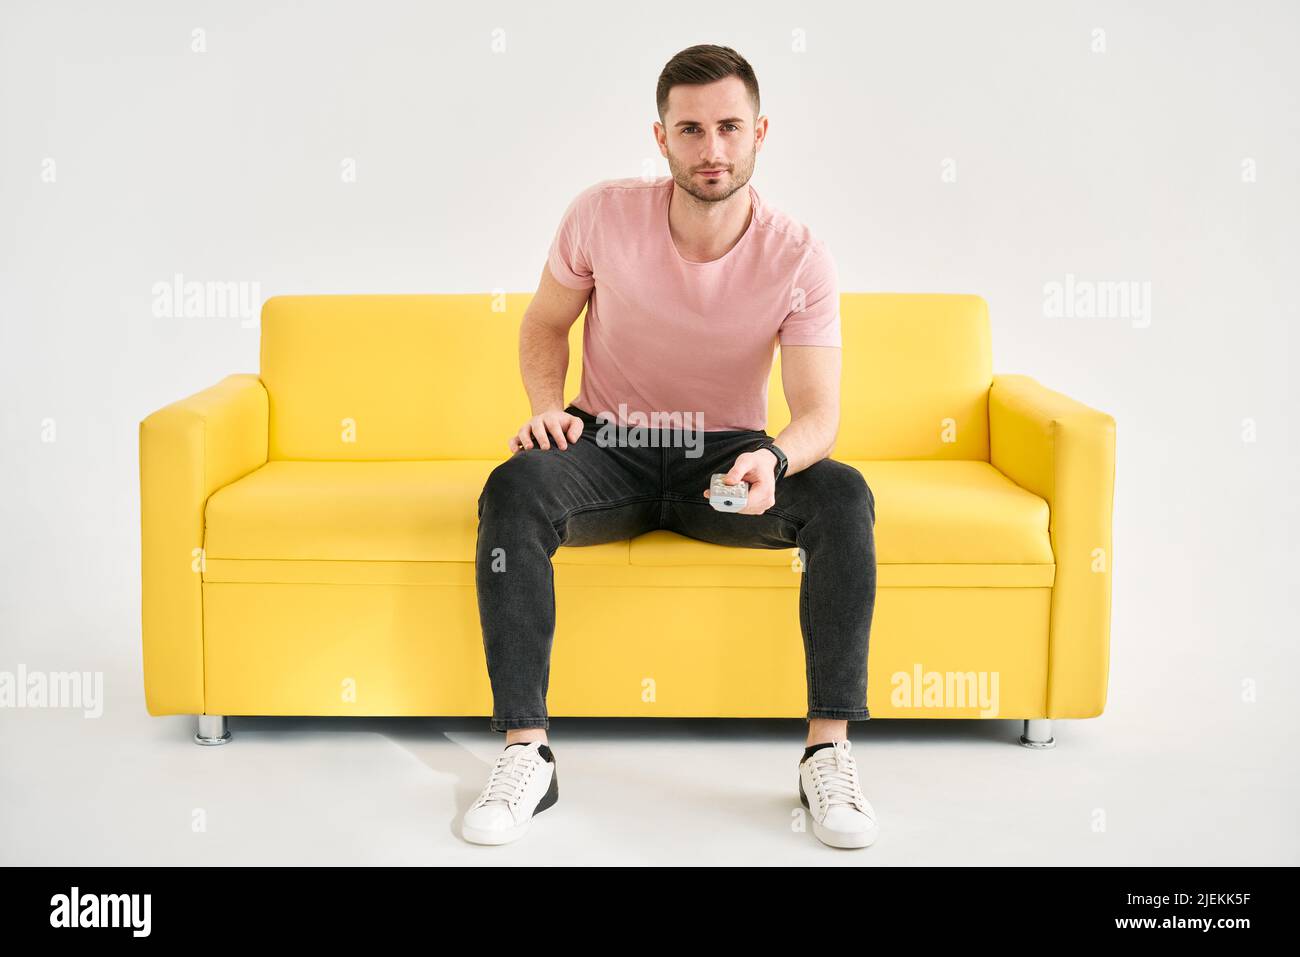 Young man watching TV with remote control sitting on comfort sofa over white background. Male looking to camera holding TV remote control Stock Photo